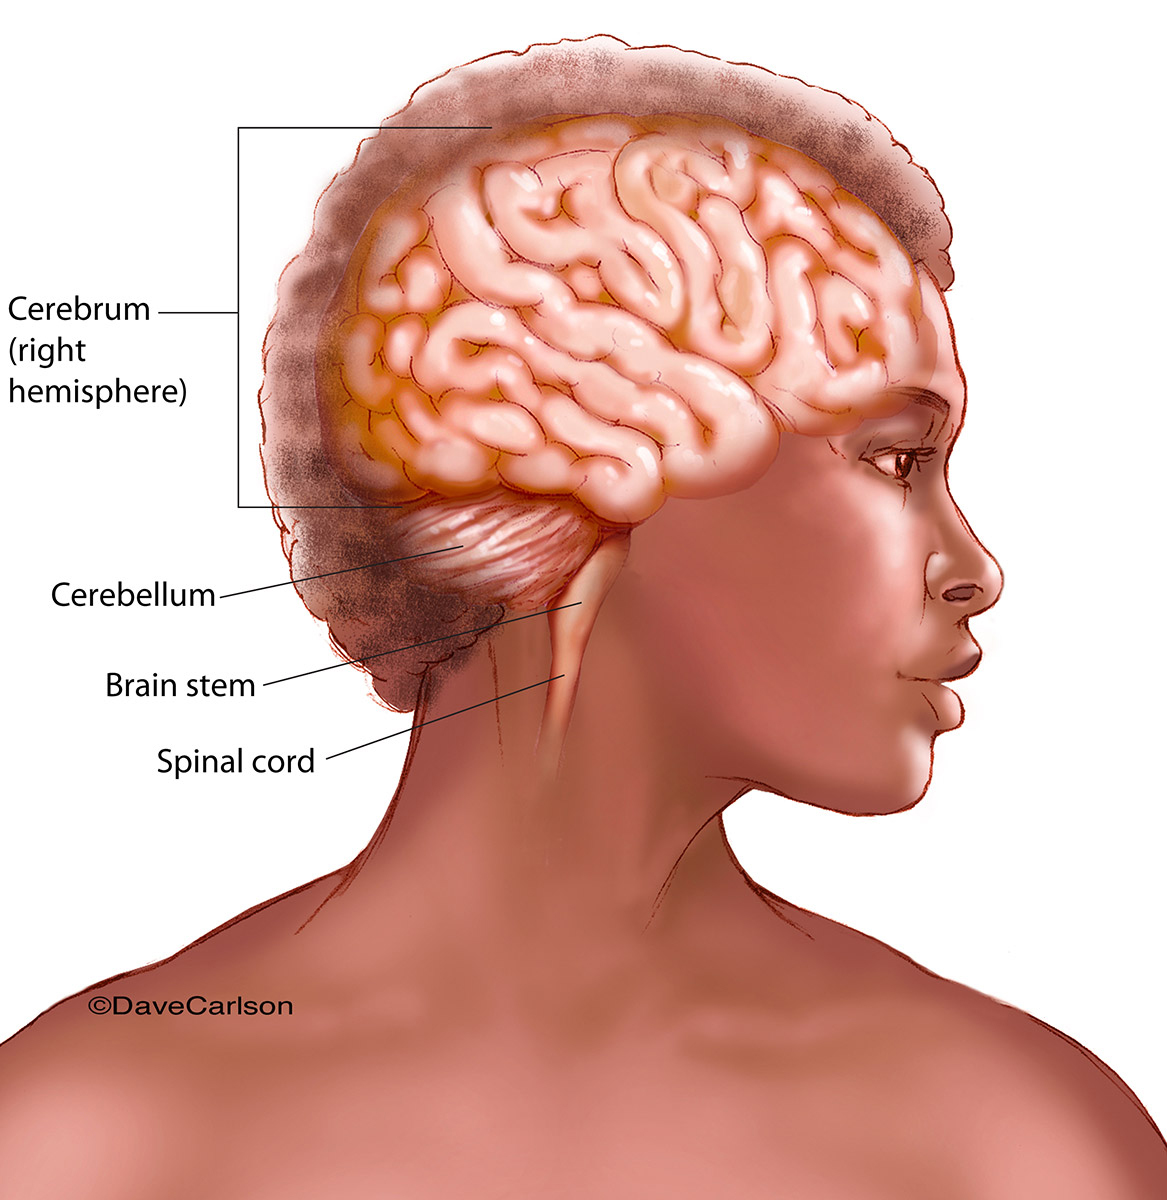 Illustration showing the cerebral cortex, cerebellum and brainstem within the head.